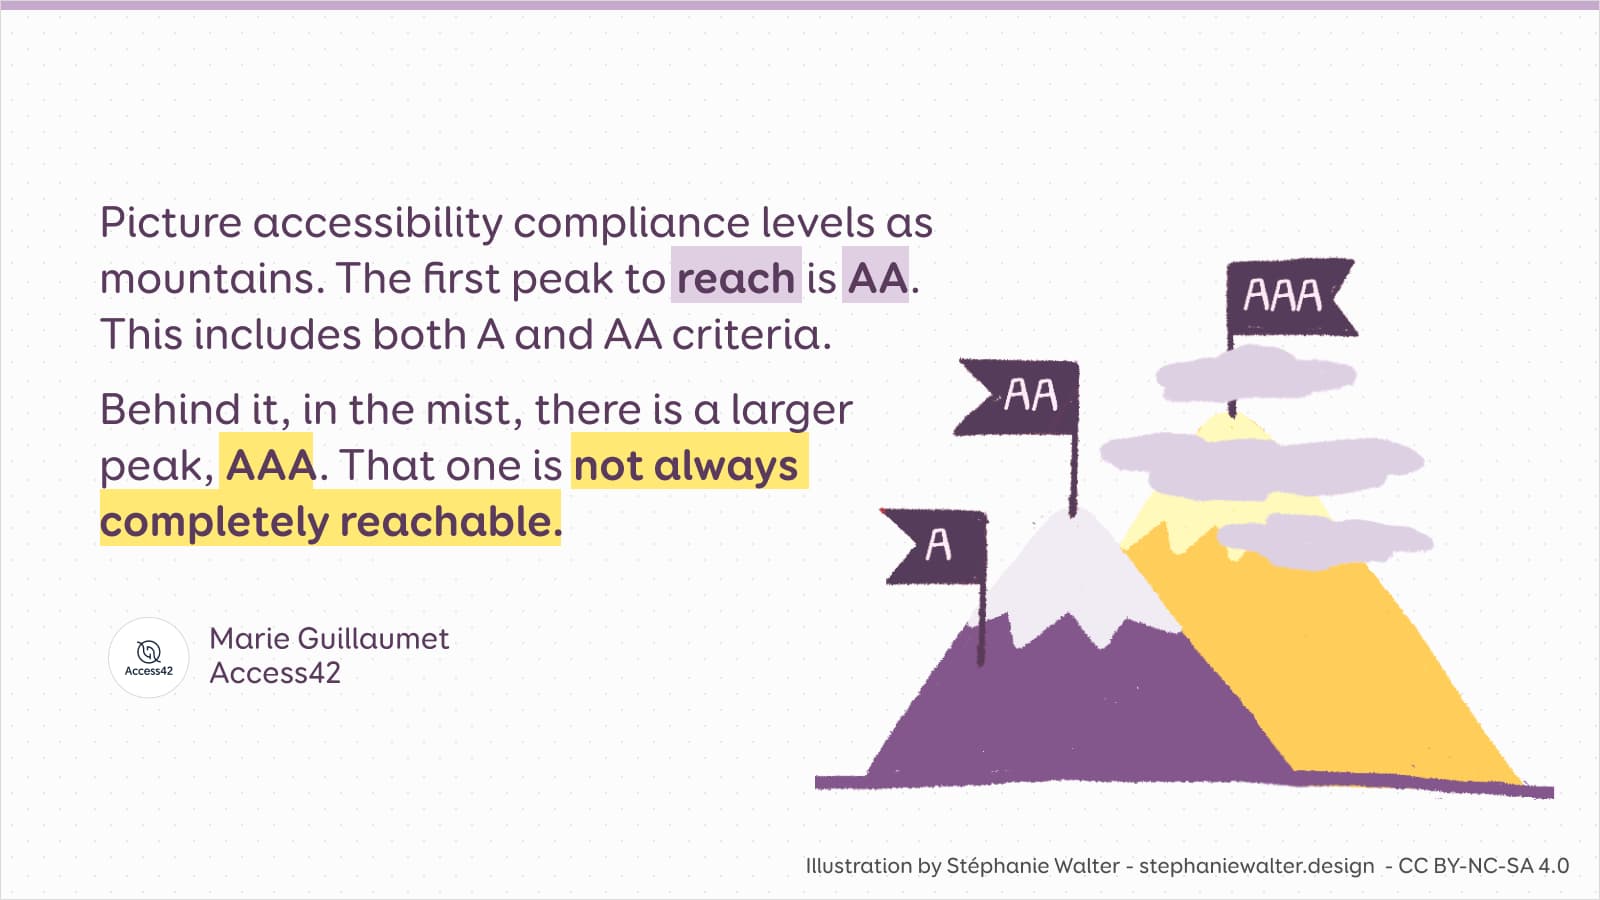 Picture accessibility compliance levels as mountains. The first peak to reach is AA. This includes both A and AA criteria. Behind it, in the mist, there is a larger peak, AAA. That one is not always completely reachable--Marie Guillaumet, Access42